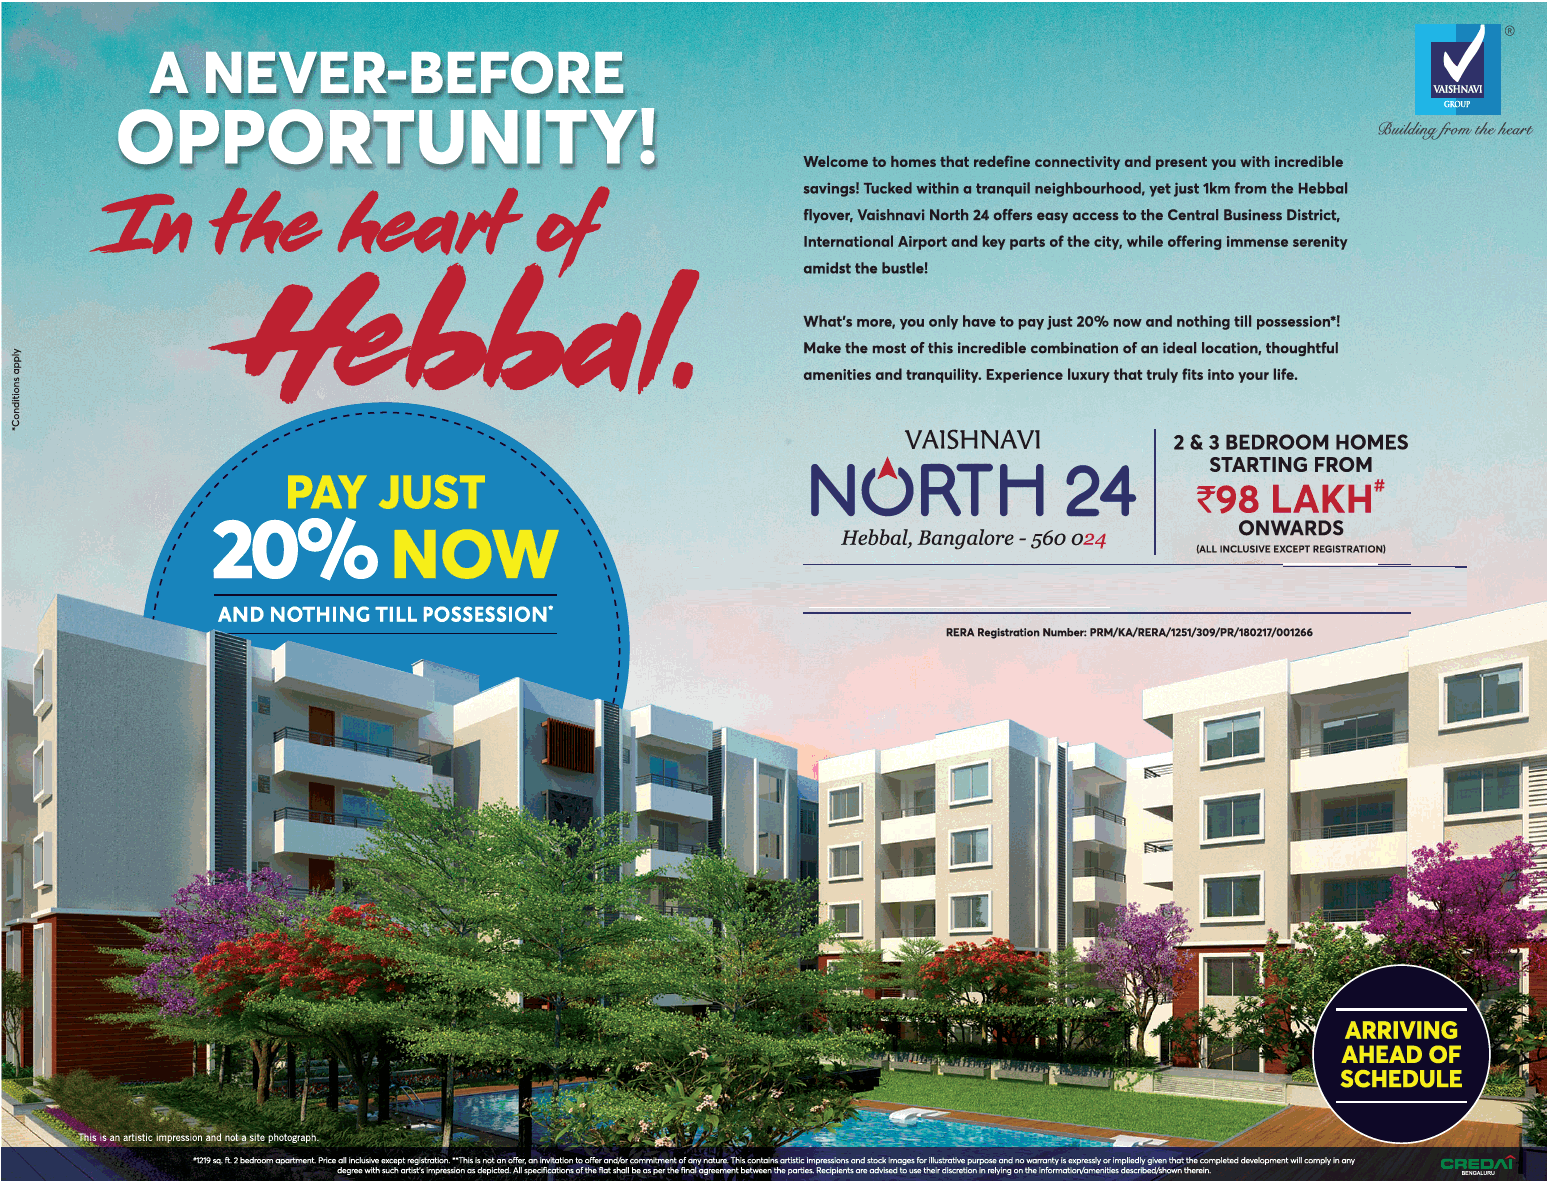 2 and 3 BHK starting from Rs 98 Lakh onwards at Vaishnavi North 24 in Bangalore